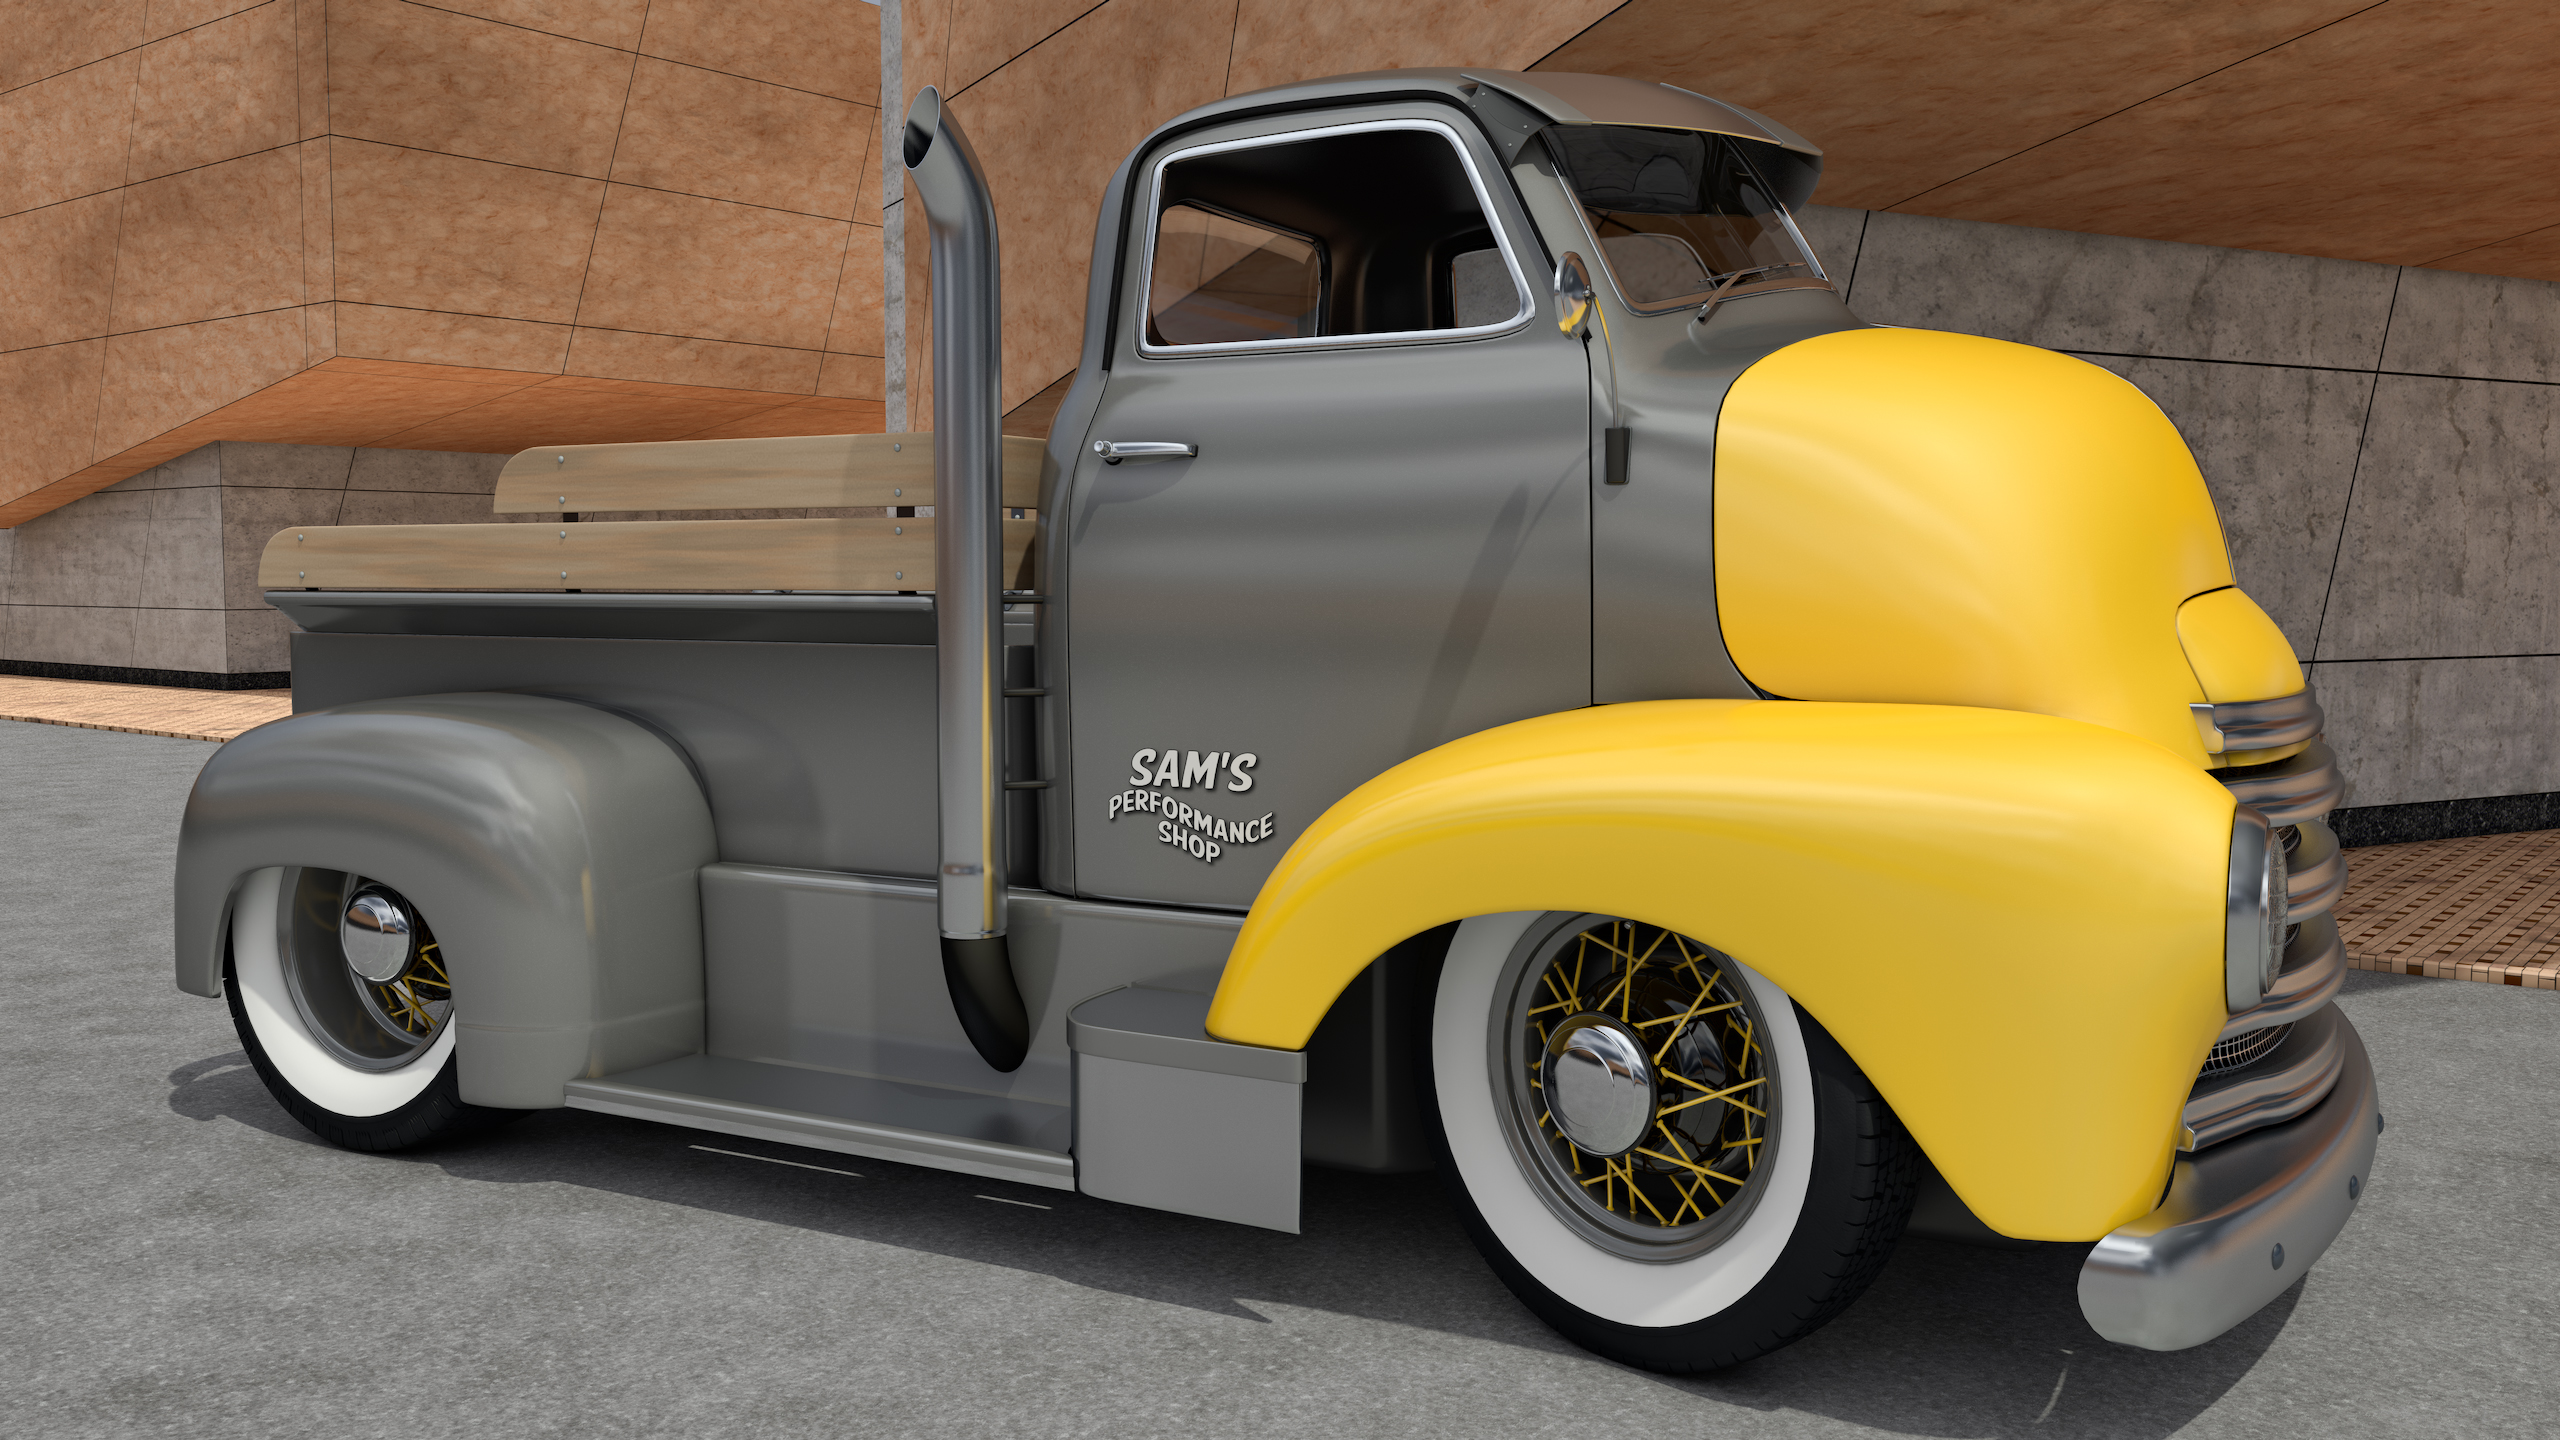 Chevrolet COE Truck by SamCurry on DeviantArt